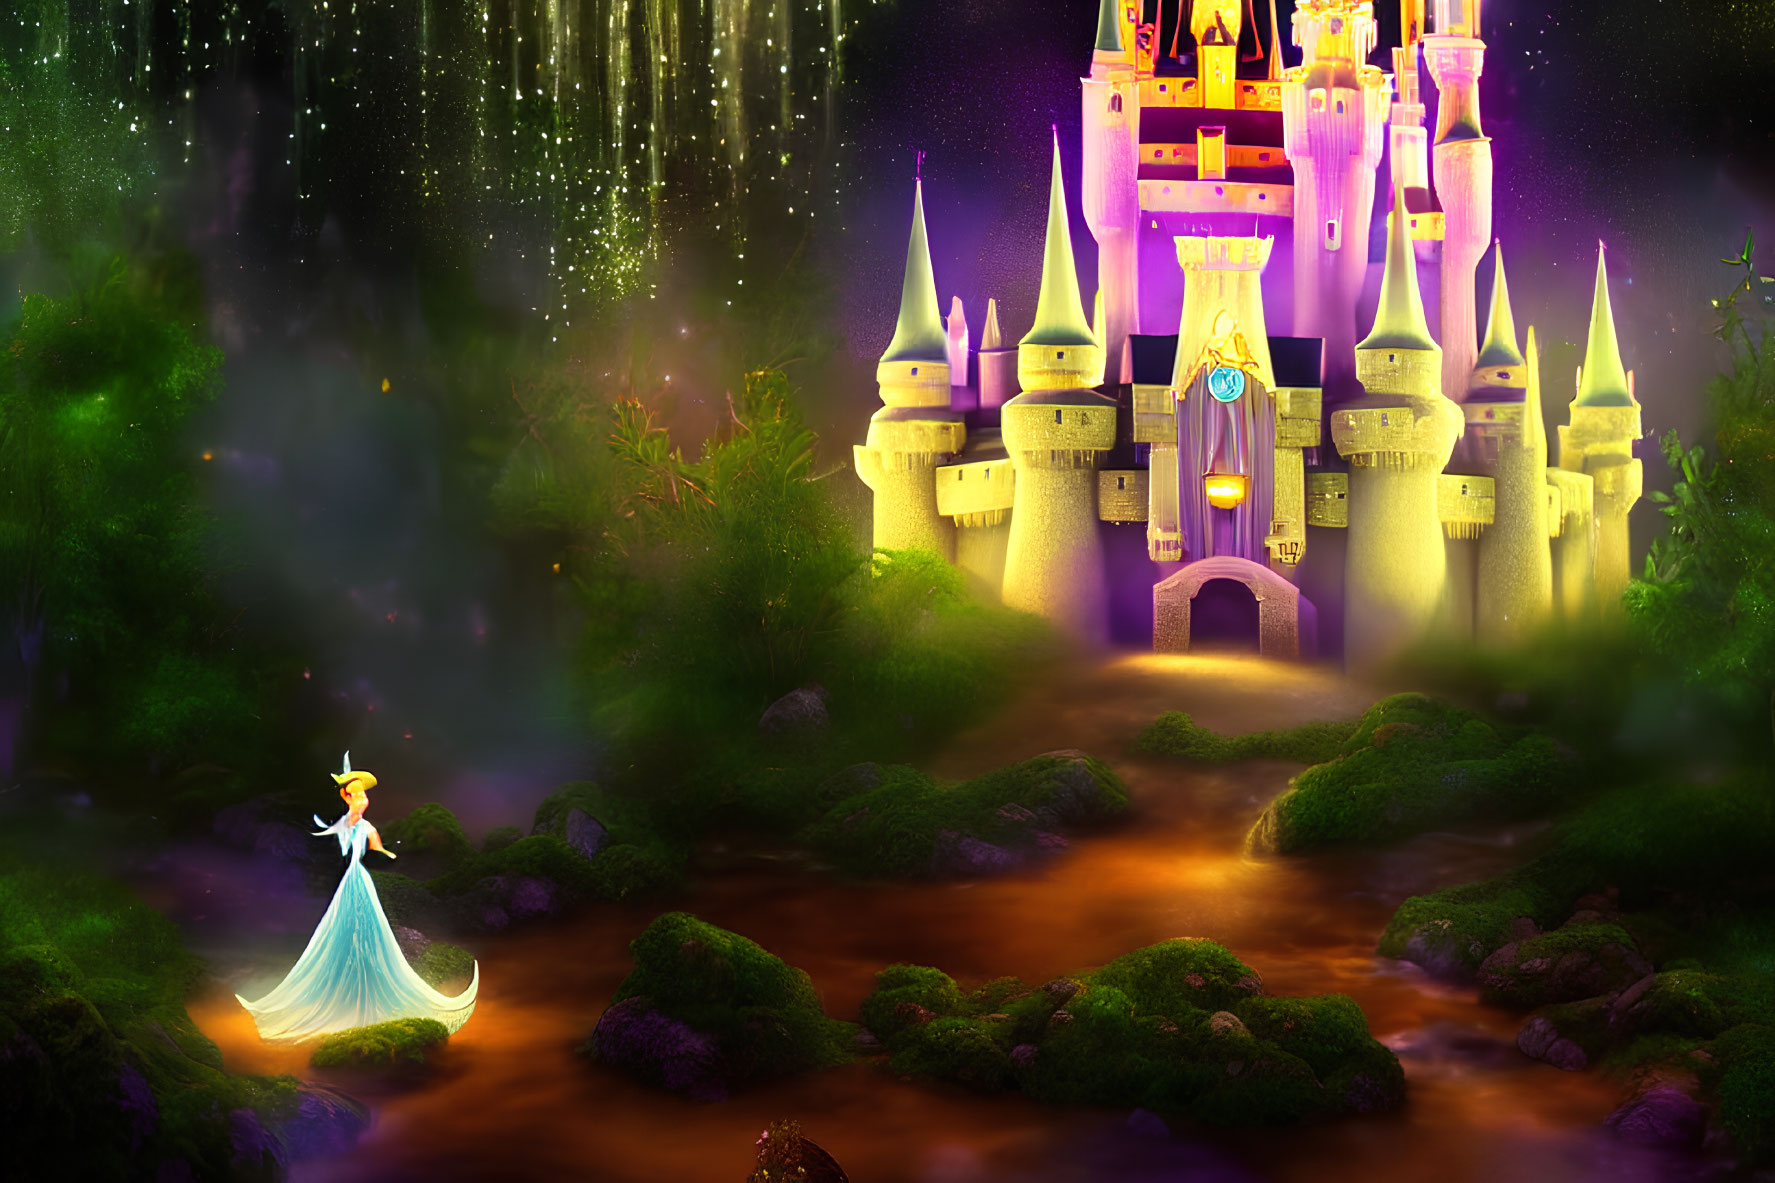 Glowing princess in front of majestic castle in magical forest